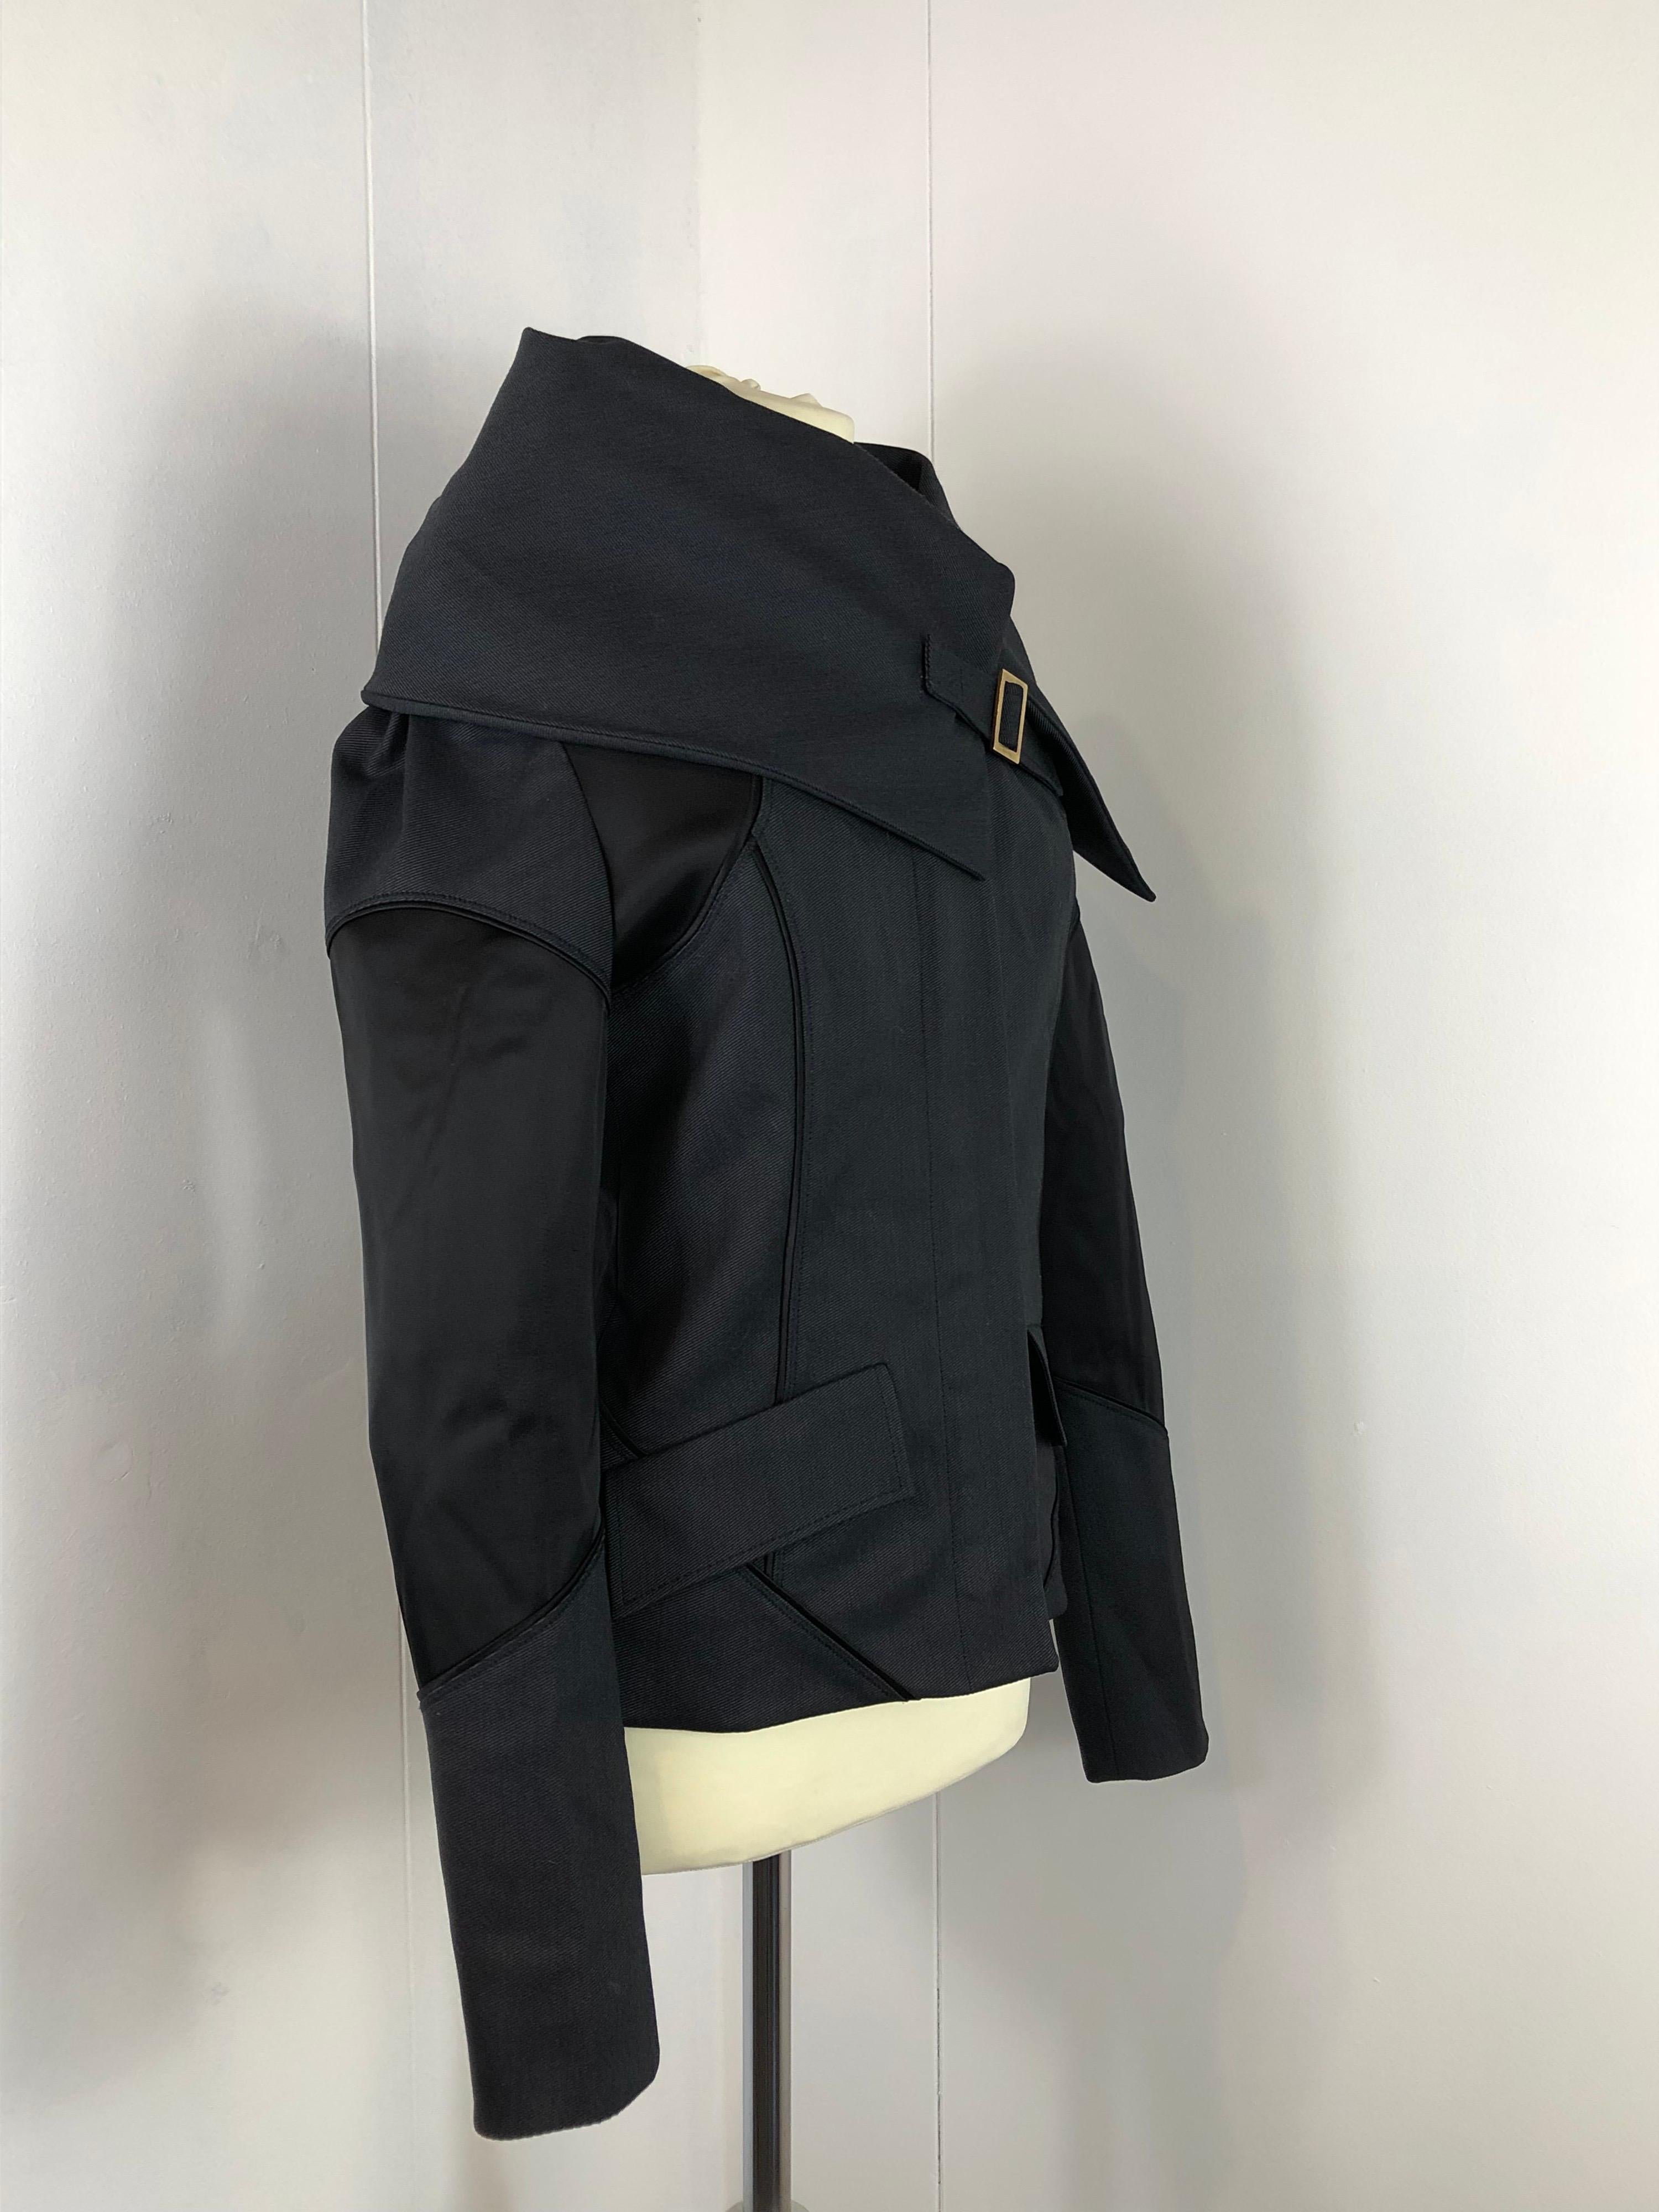 Gucci vintage jacket.
Coming from 2003 collection by Tom Ford. 
Materials are a mix between wool, nylon, elastane and viscose. Fully lined. 
Featuring 2 frontal pockets (one is still closed), double zip aperture. Neck line has different styling as